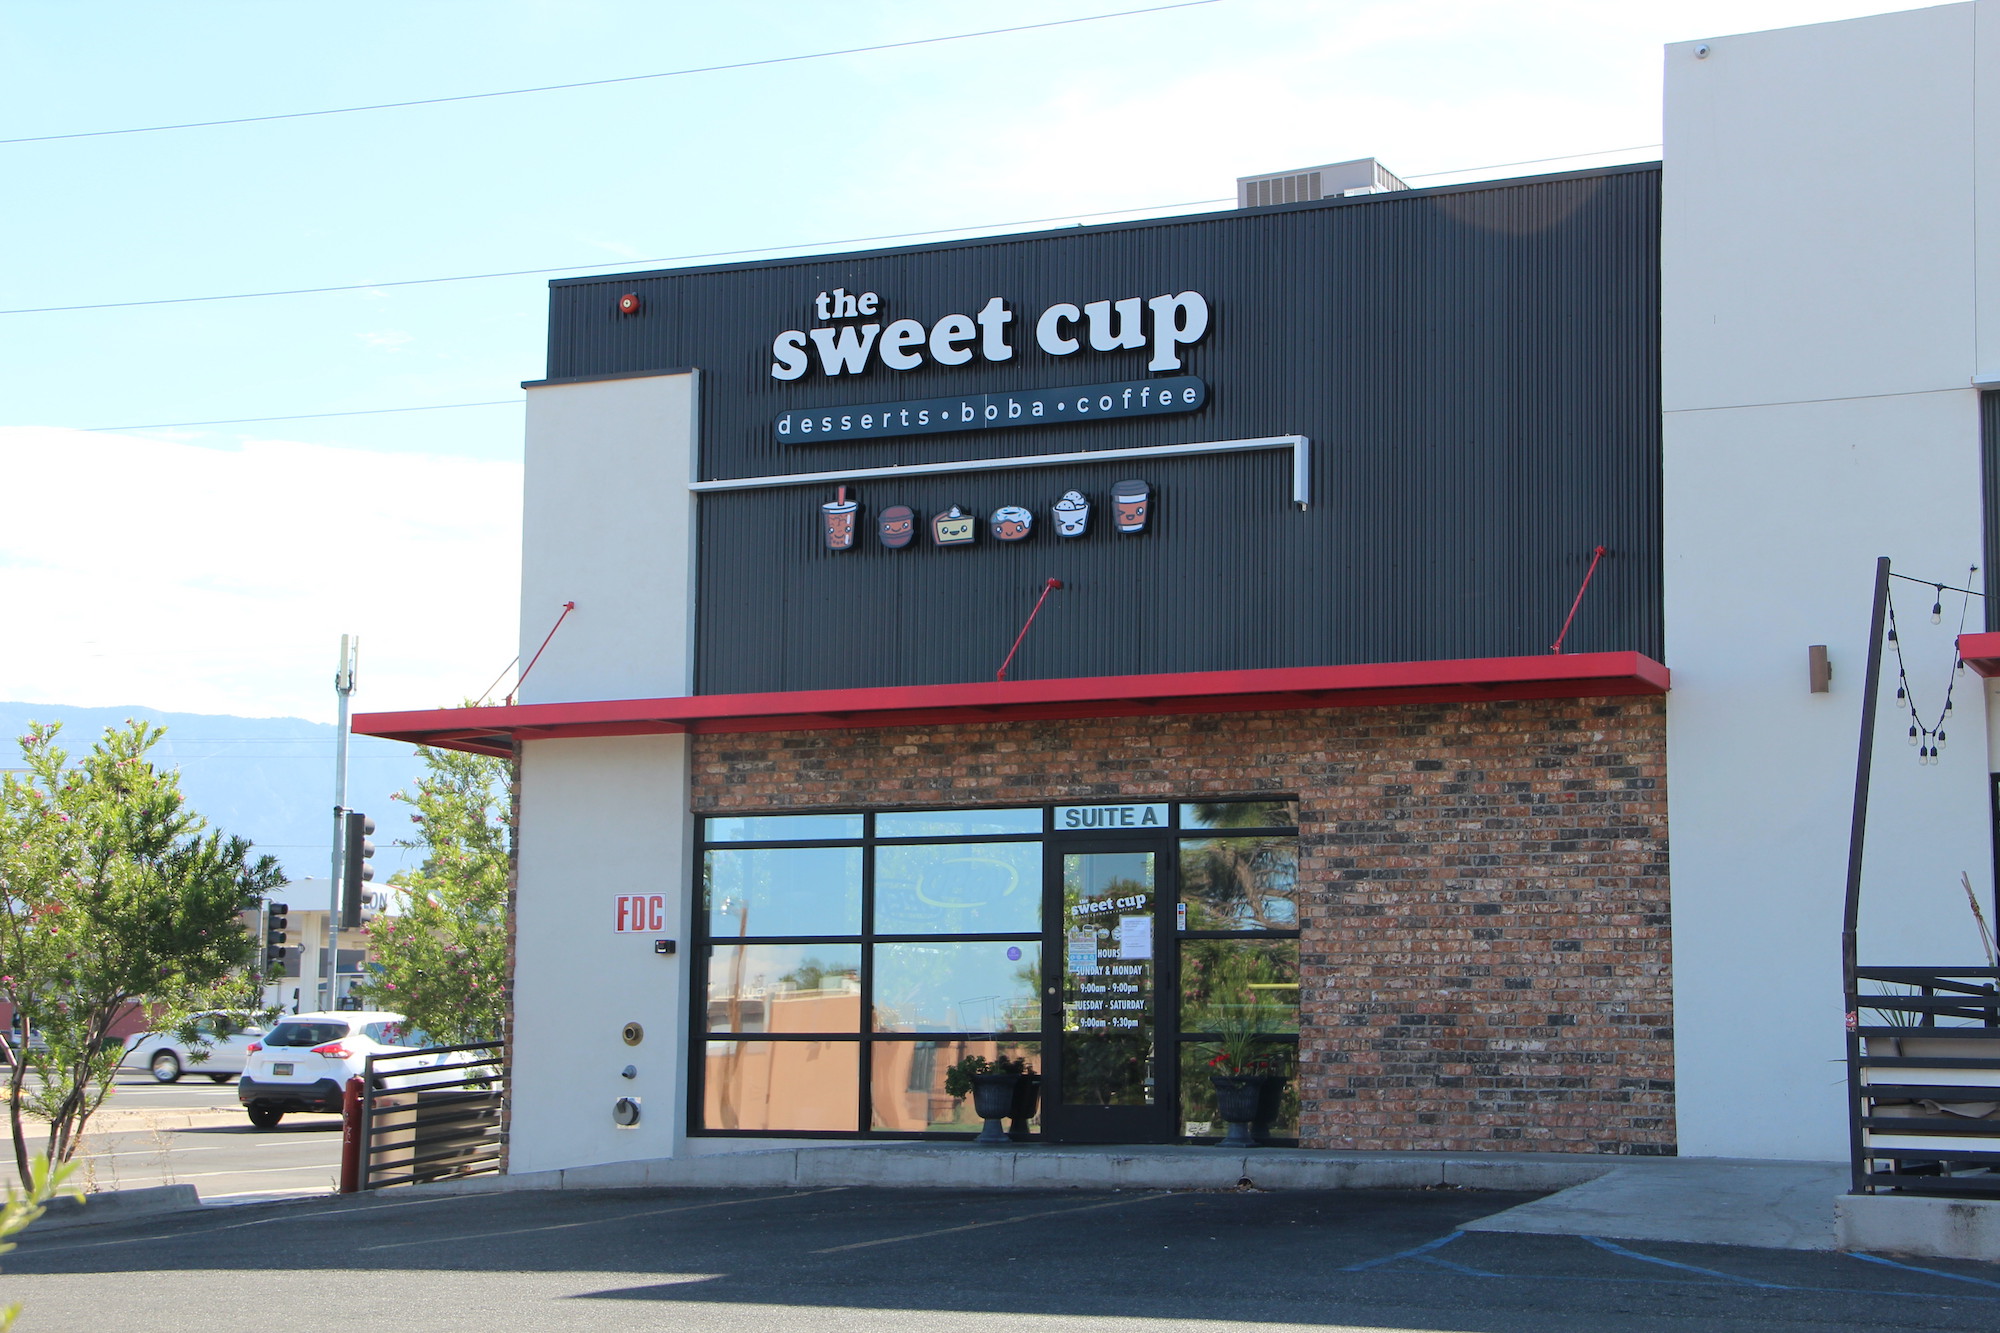 Picture of The Sweet Cup Desserts Boba Coffee 3517 Wyoming Blvd NE suite a, Albuquerque, NM 87111